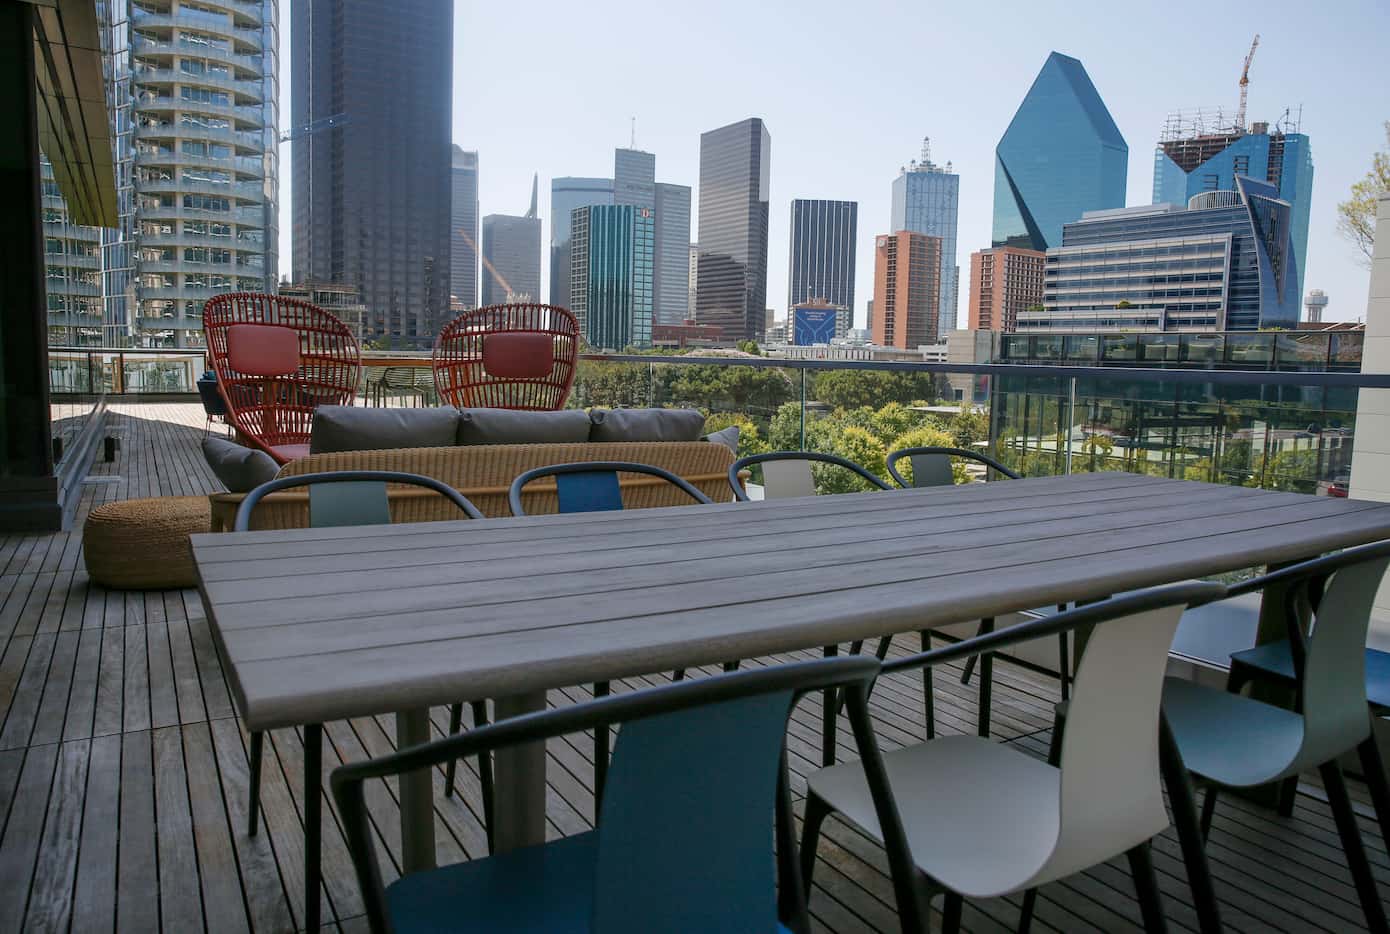 Hana's outdoor coworking space with a view of downtown Dallas.